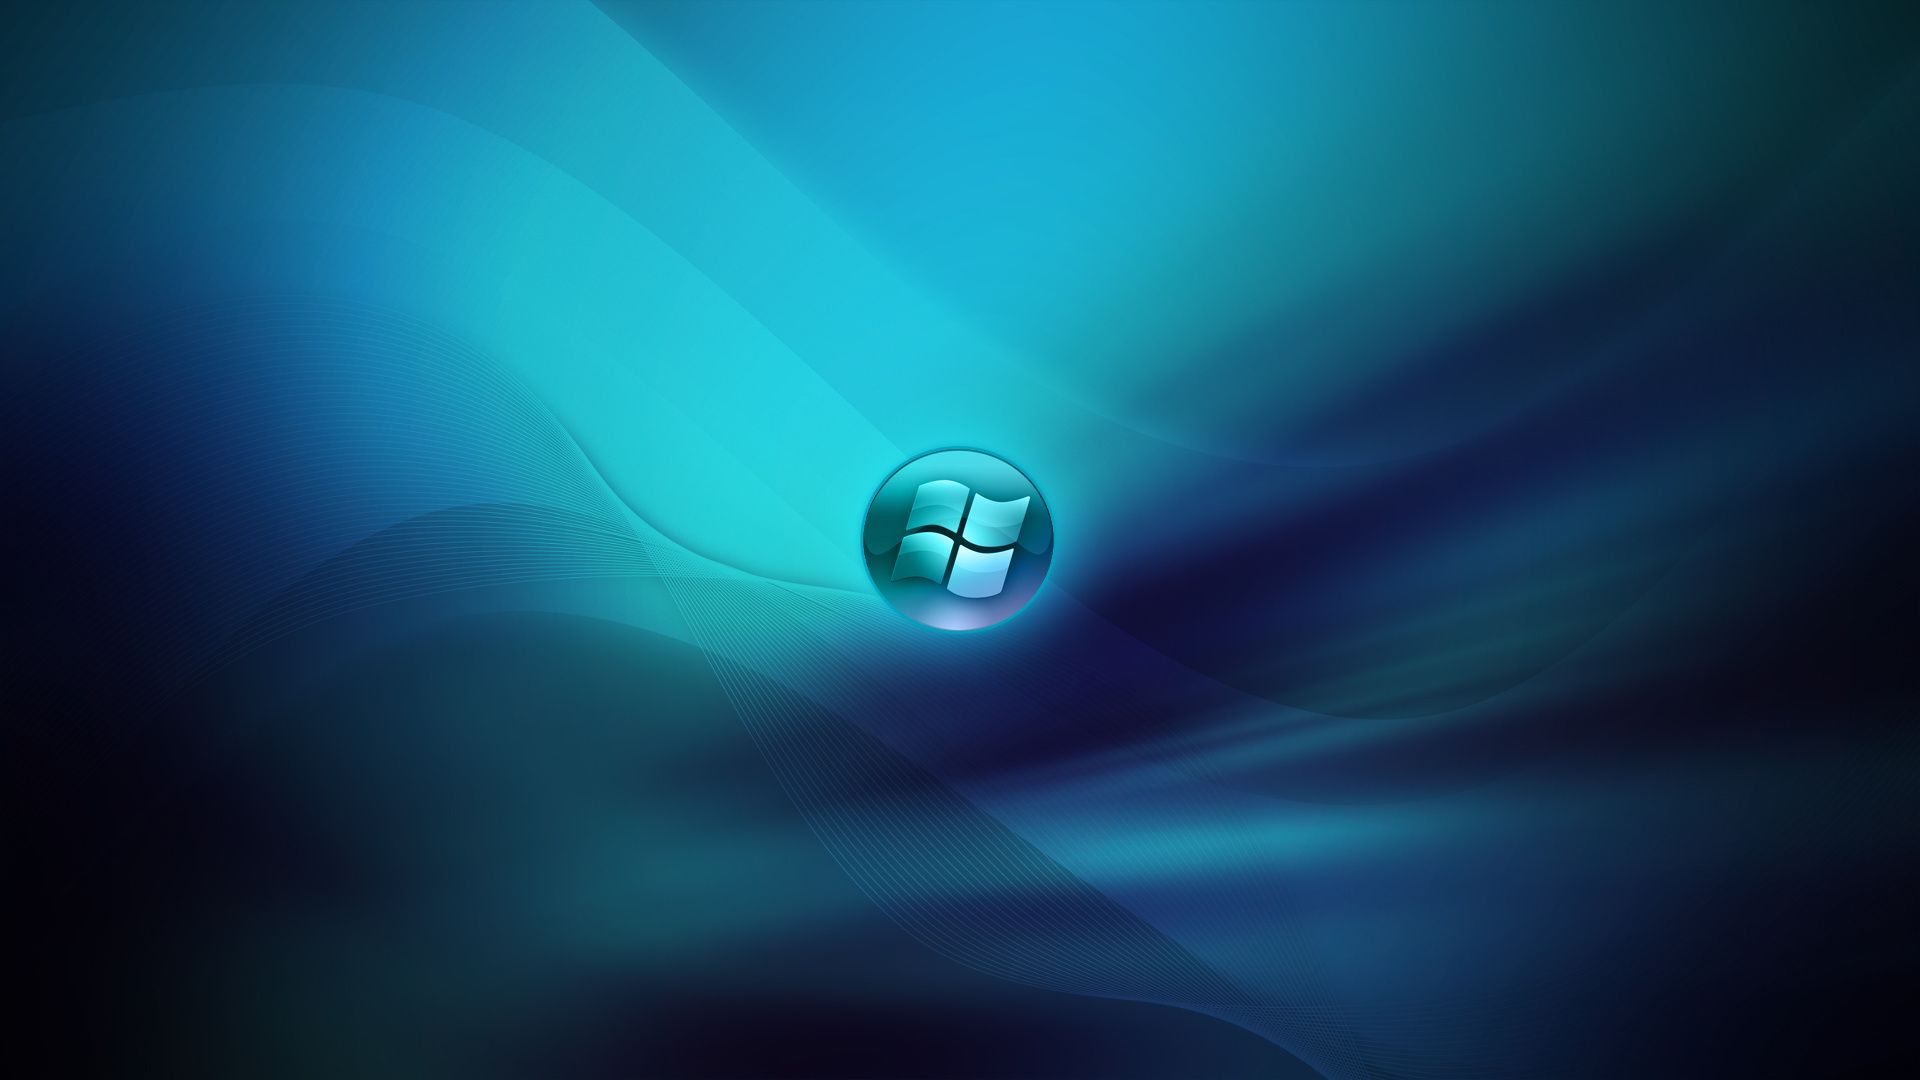 Windows Full Hd Wallpapers Group 94